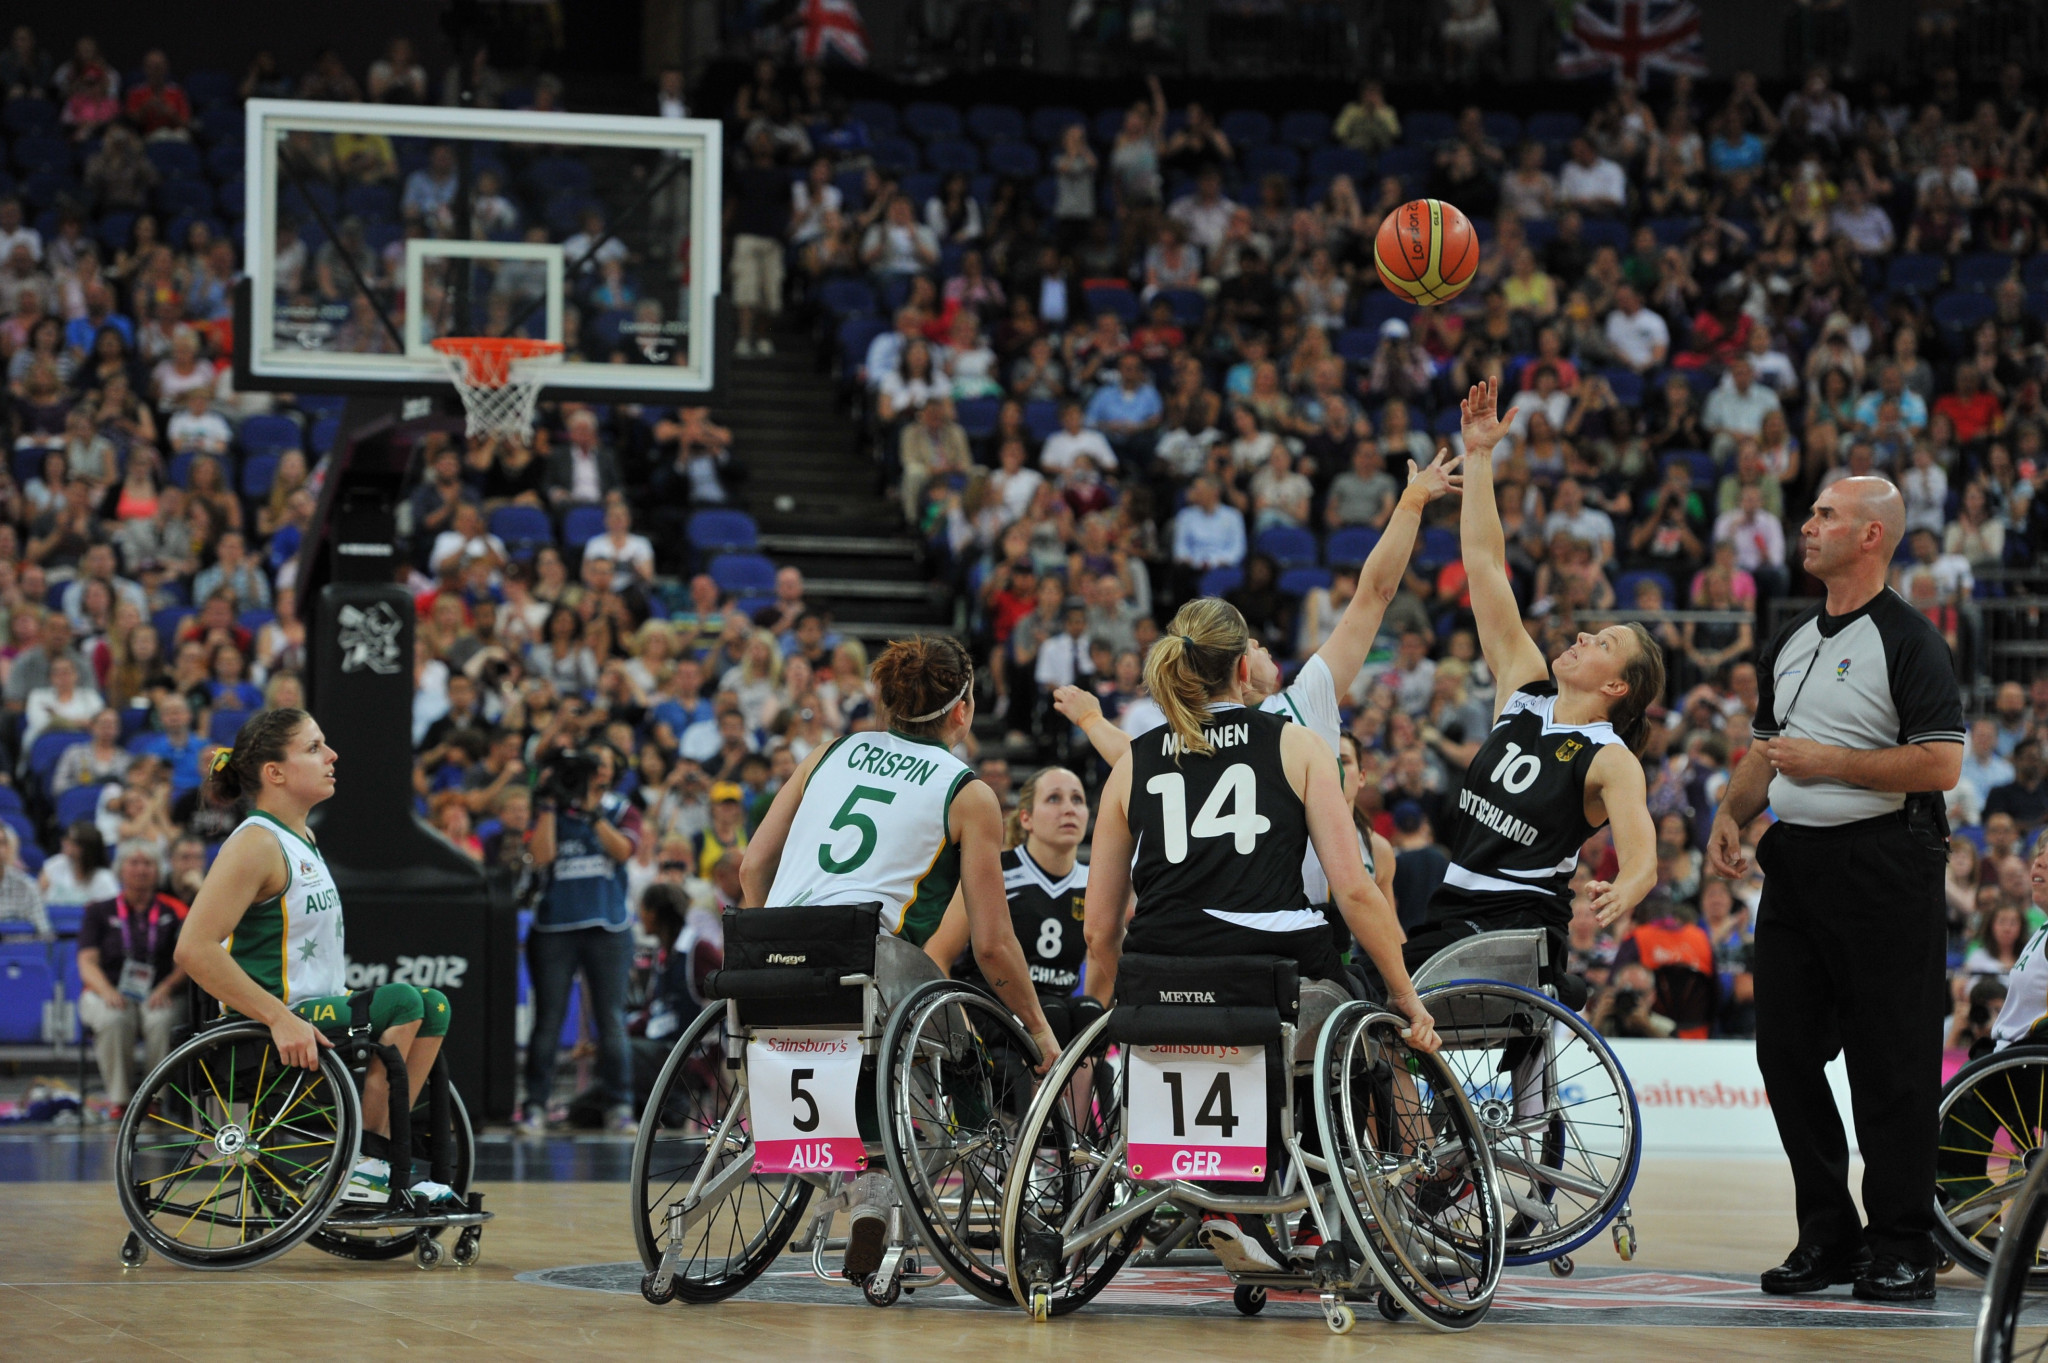 Wheelchair basketball rulebook published in Brazilian Portuguese